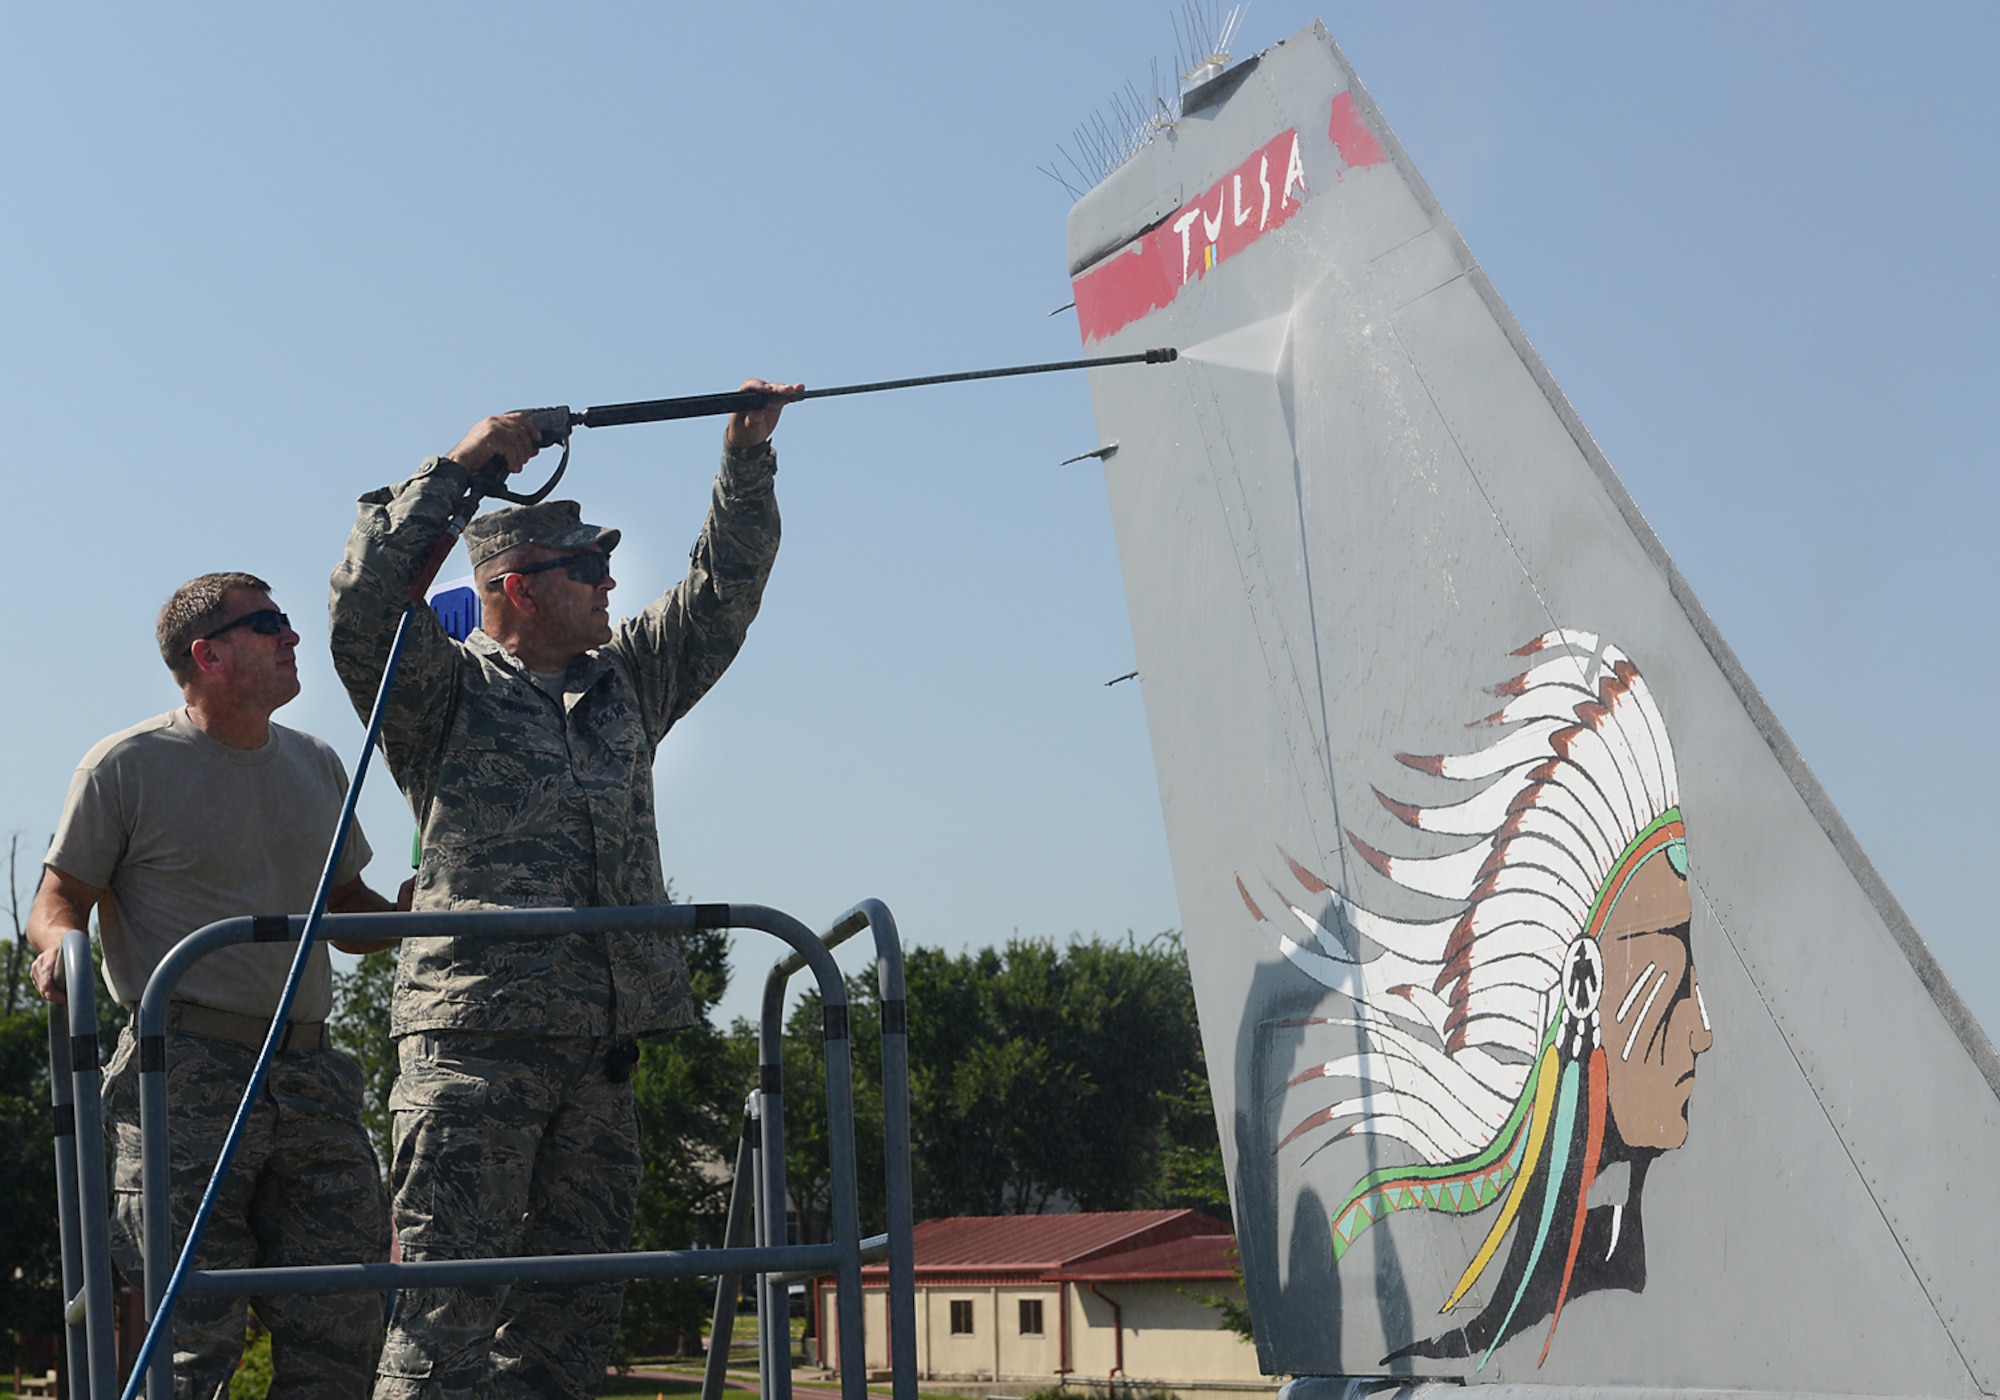 Lieutenant Colonel Travis Brown, 138th Maintenance Squadron Commander and Chief Master Sergeant Tracey Weaver, 138th Aircraft Maintenance Chief, power wash the tail of an F-16 static display aircraft at the Tulsa Air National Guard base, Tulsa Okla., 29 July 2014.  Members of the 138th FW Chiefs Council gathered to wash the static aircraft in an effort to keep them looking nice for public display.  (U.S. National Guard photo by Senior Master Sgt.  Preston L. Chasteen/Released)